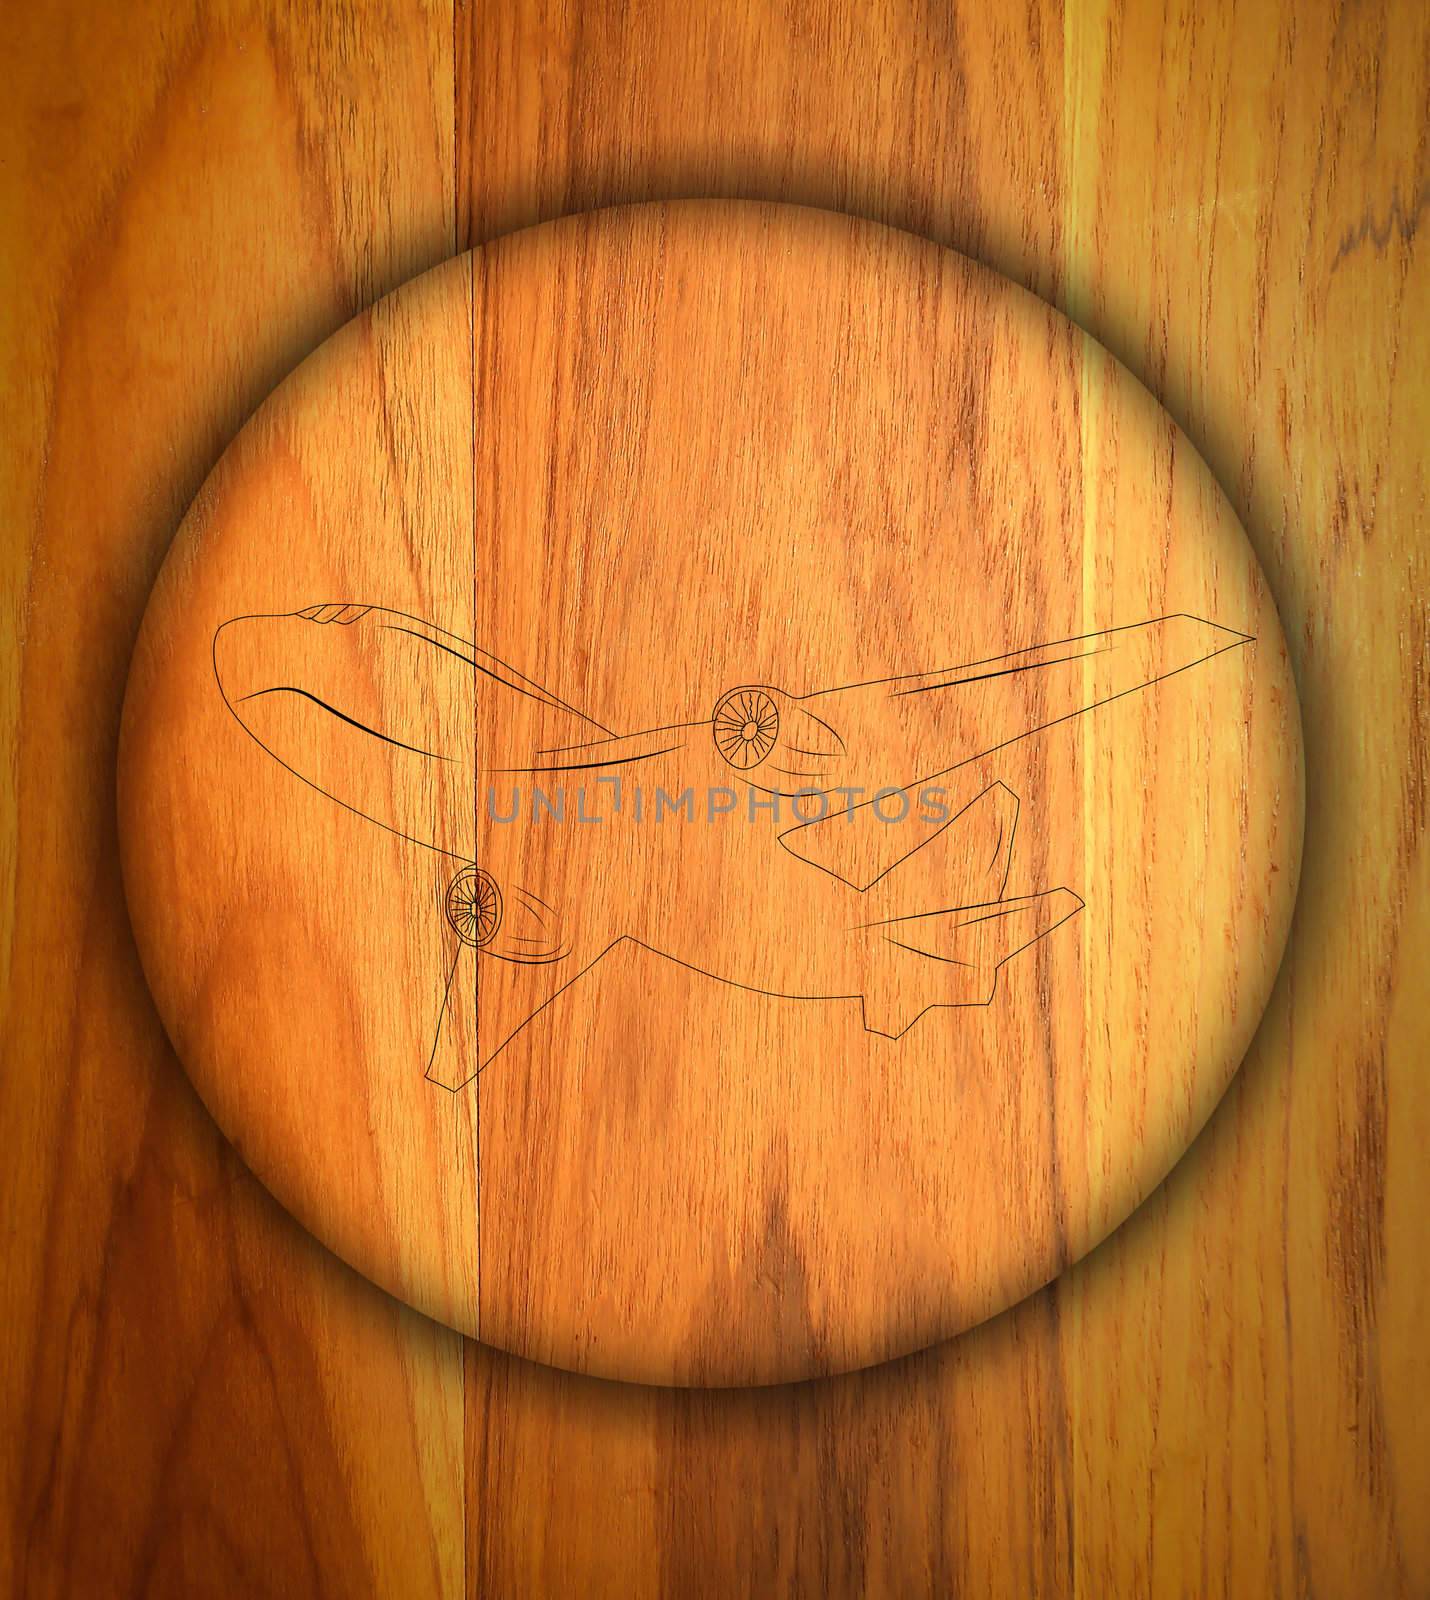 Airplane Sign icon on wood texture and background by rufous